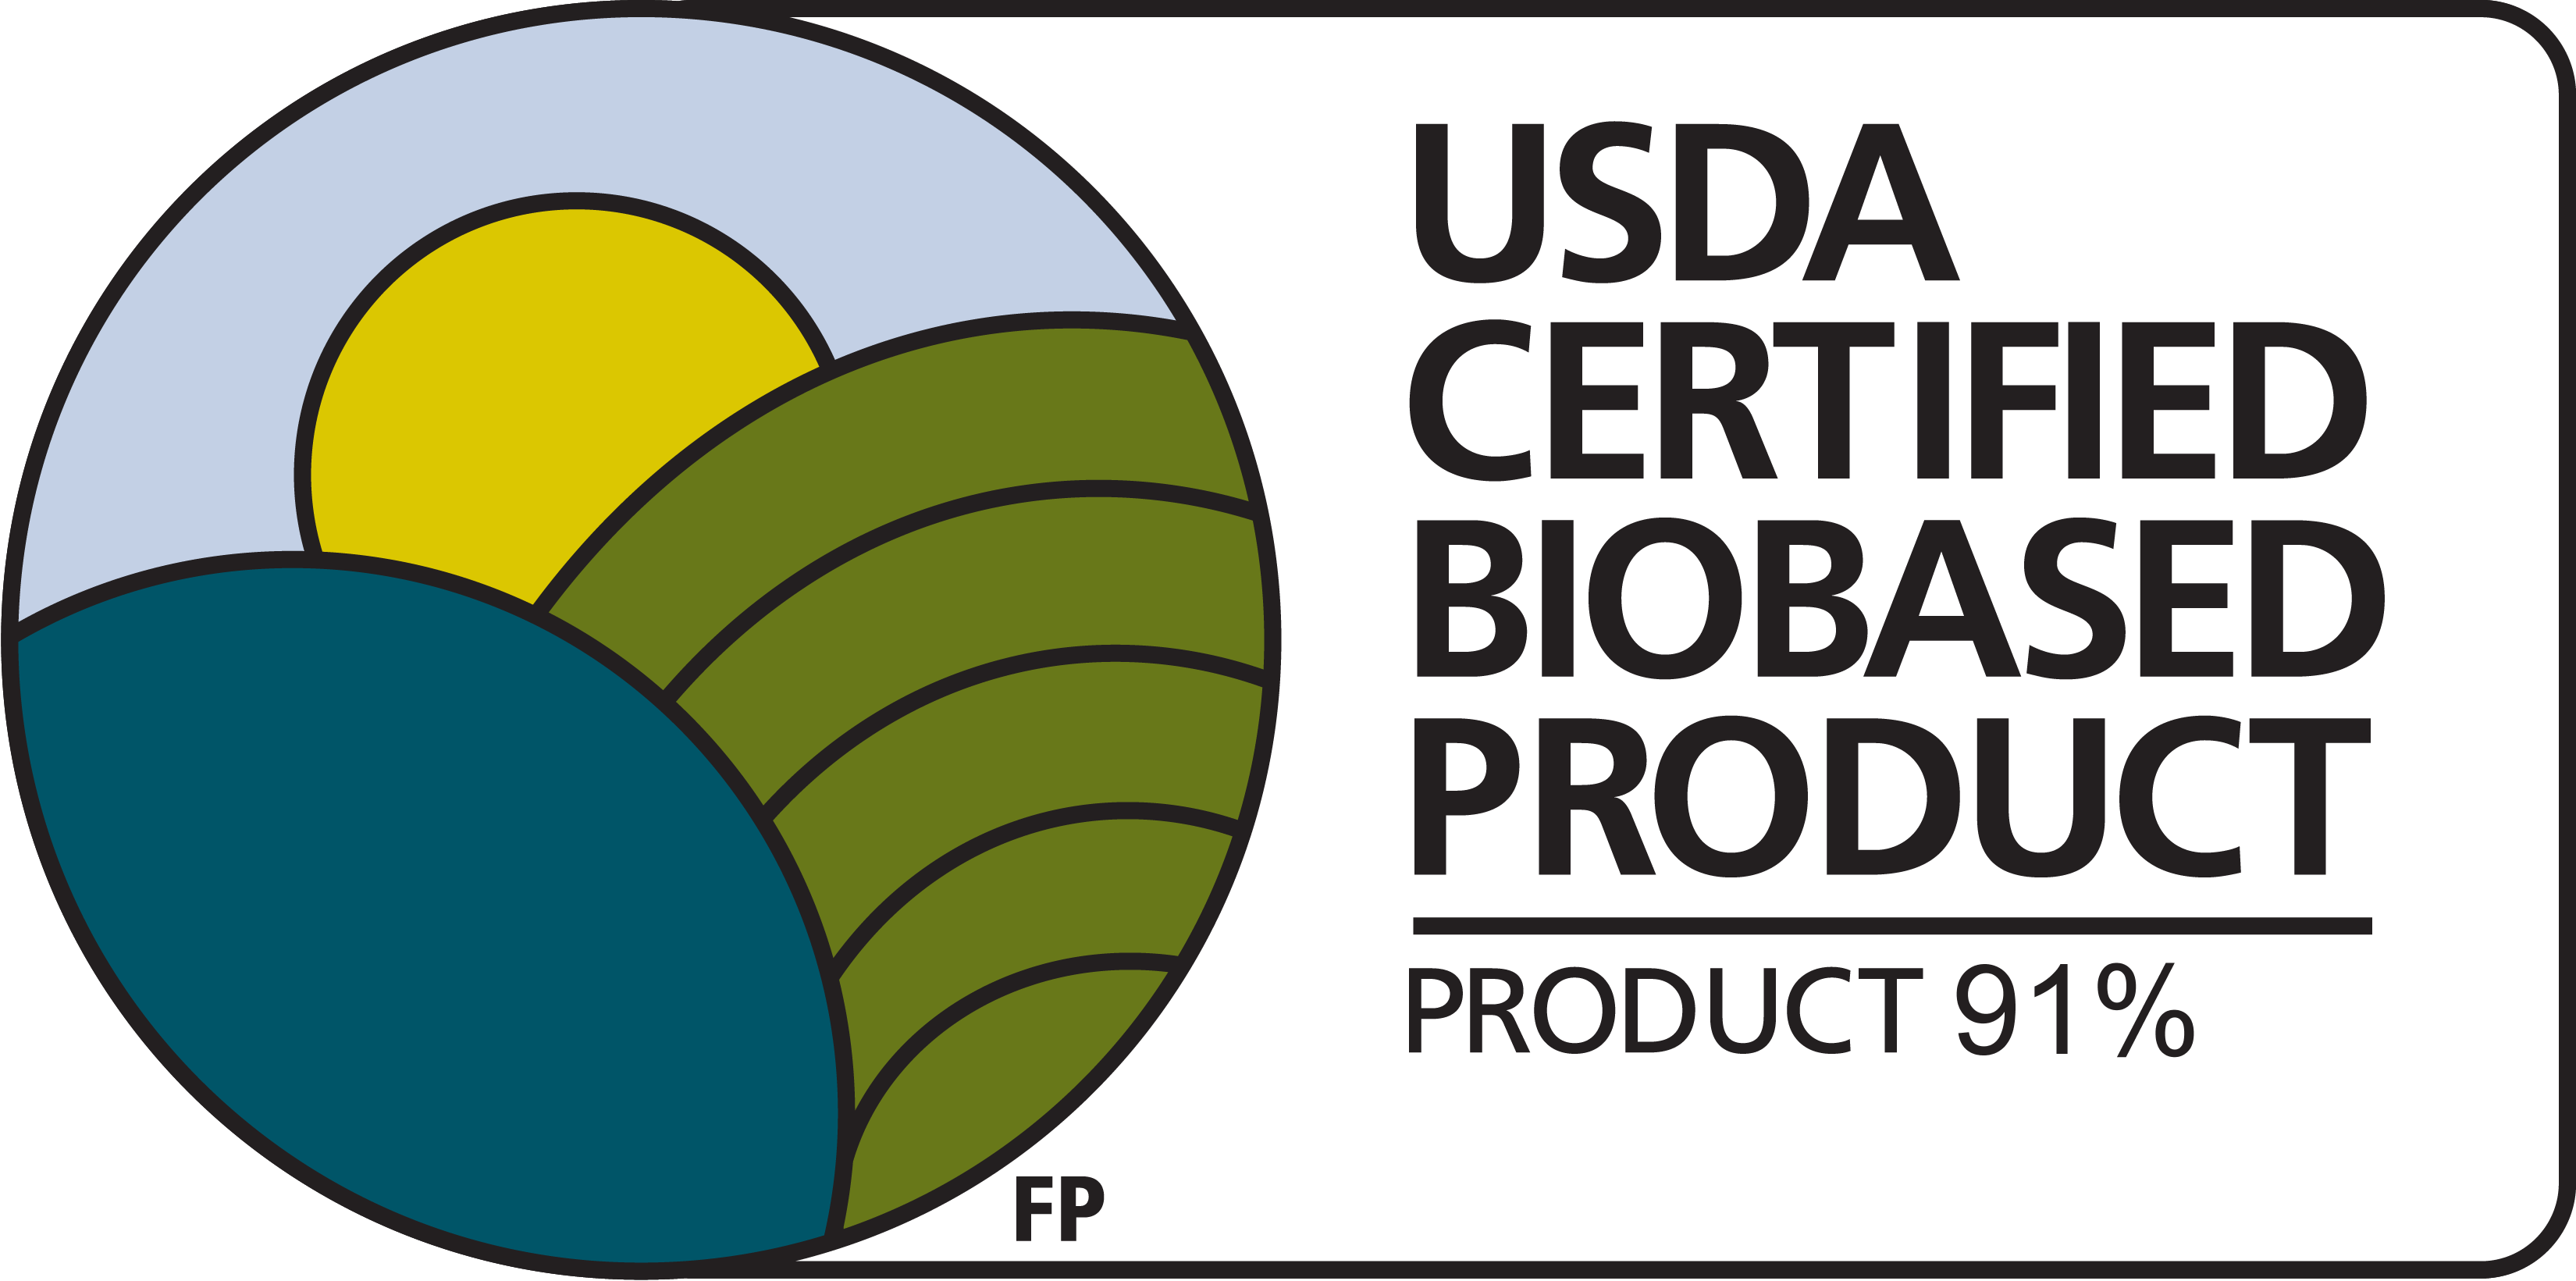 USDA Certified Biobased Product Label for Honest Bubble Bath